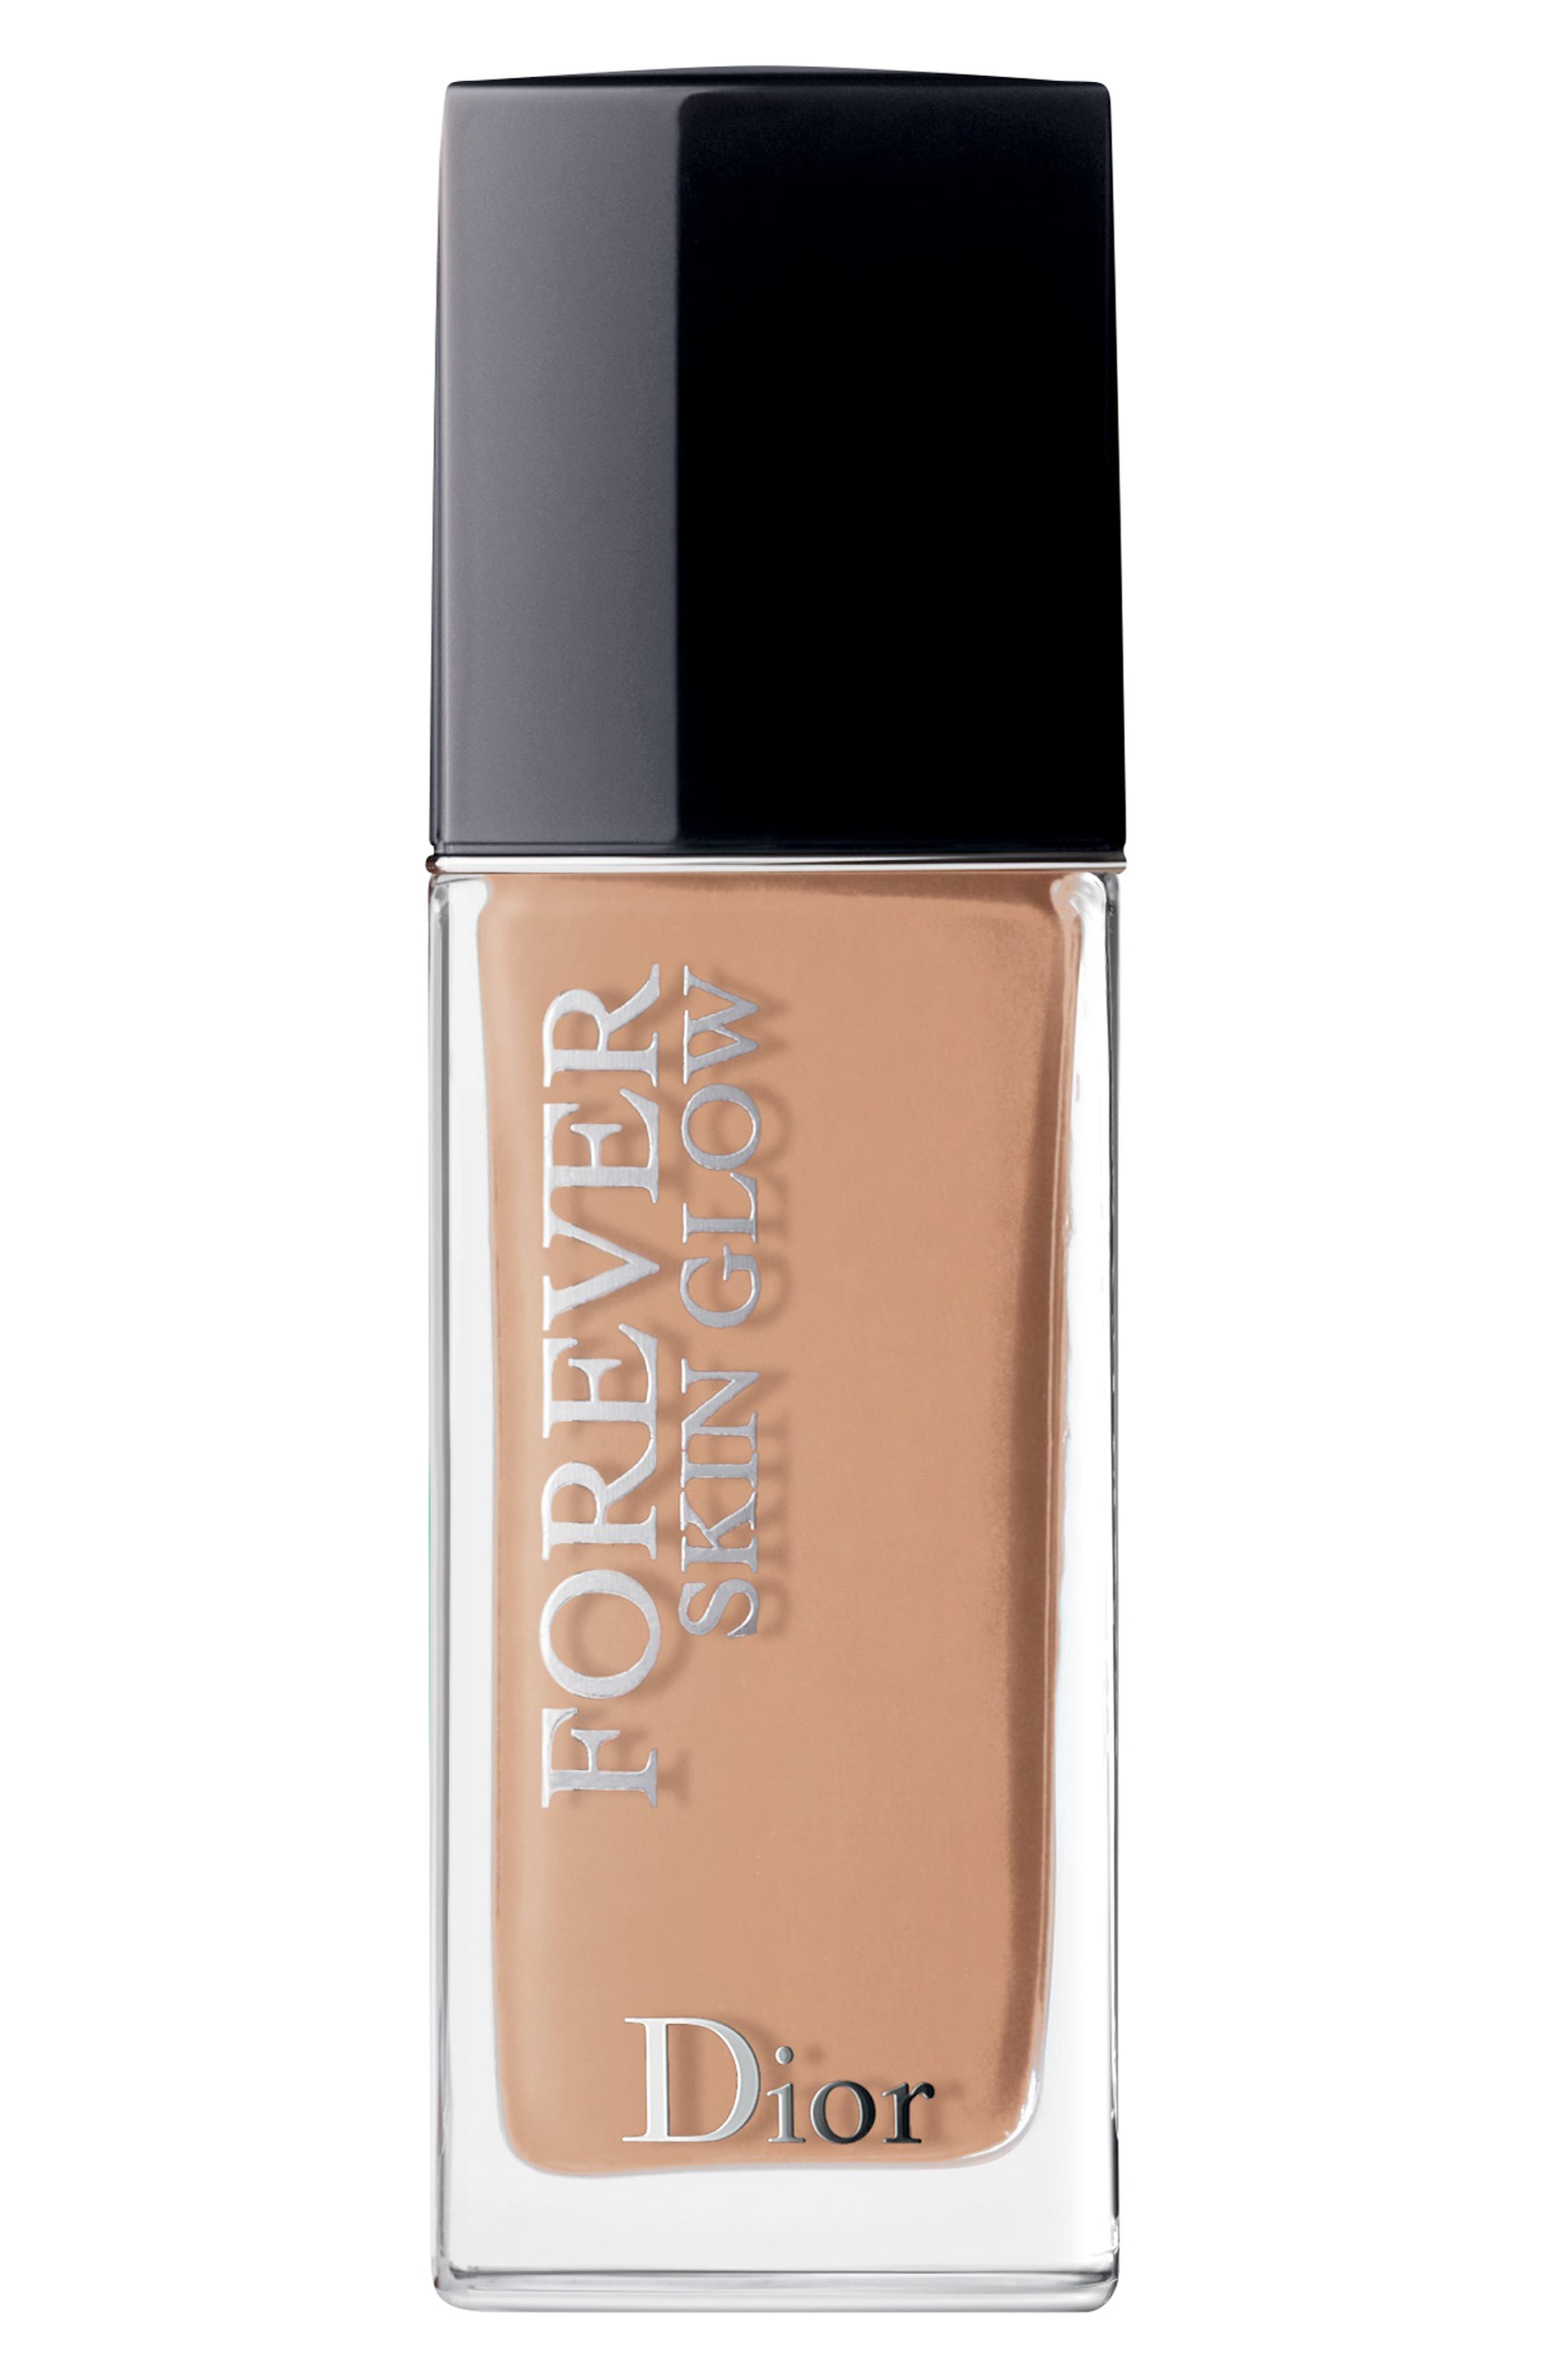 Dior Forever Skin Glow 24H Wear Radiant High Perfection Foundation SPF 35